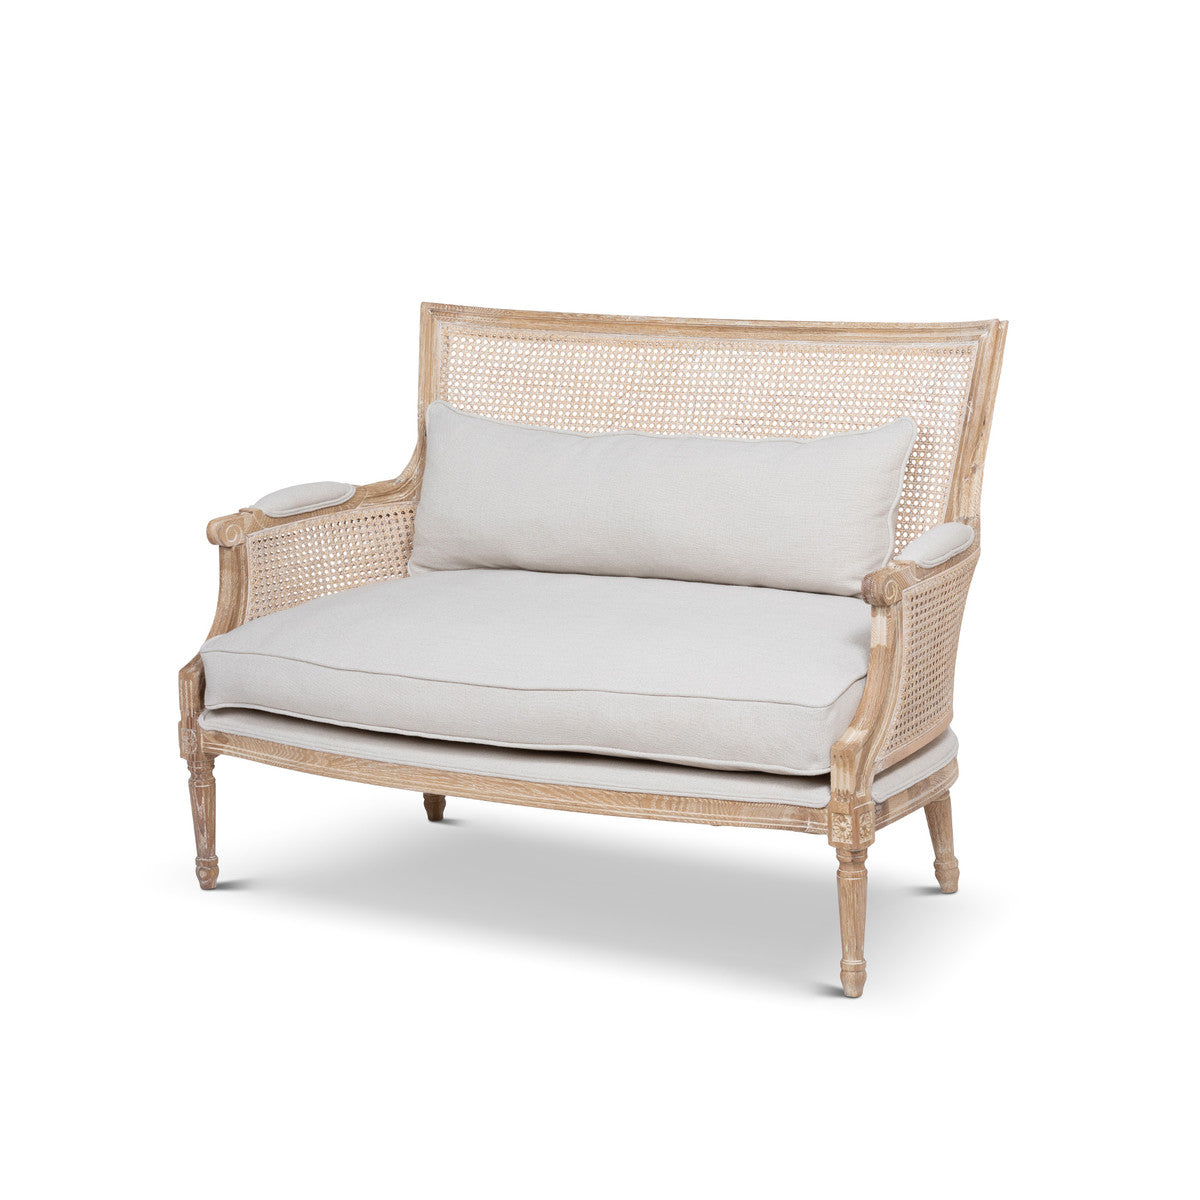 Lovecup Marissa Cane Back Cottage Loveseat LOVECUP